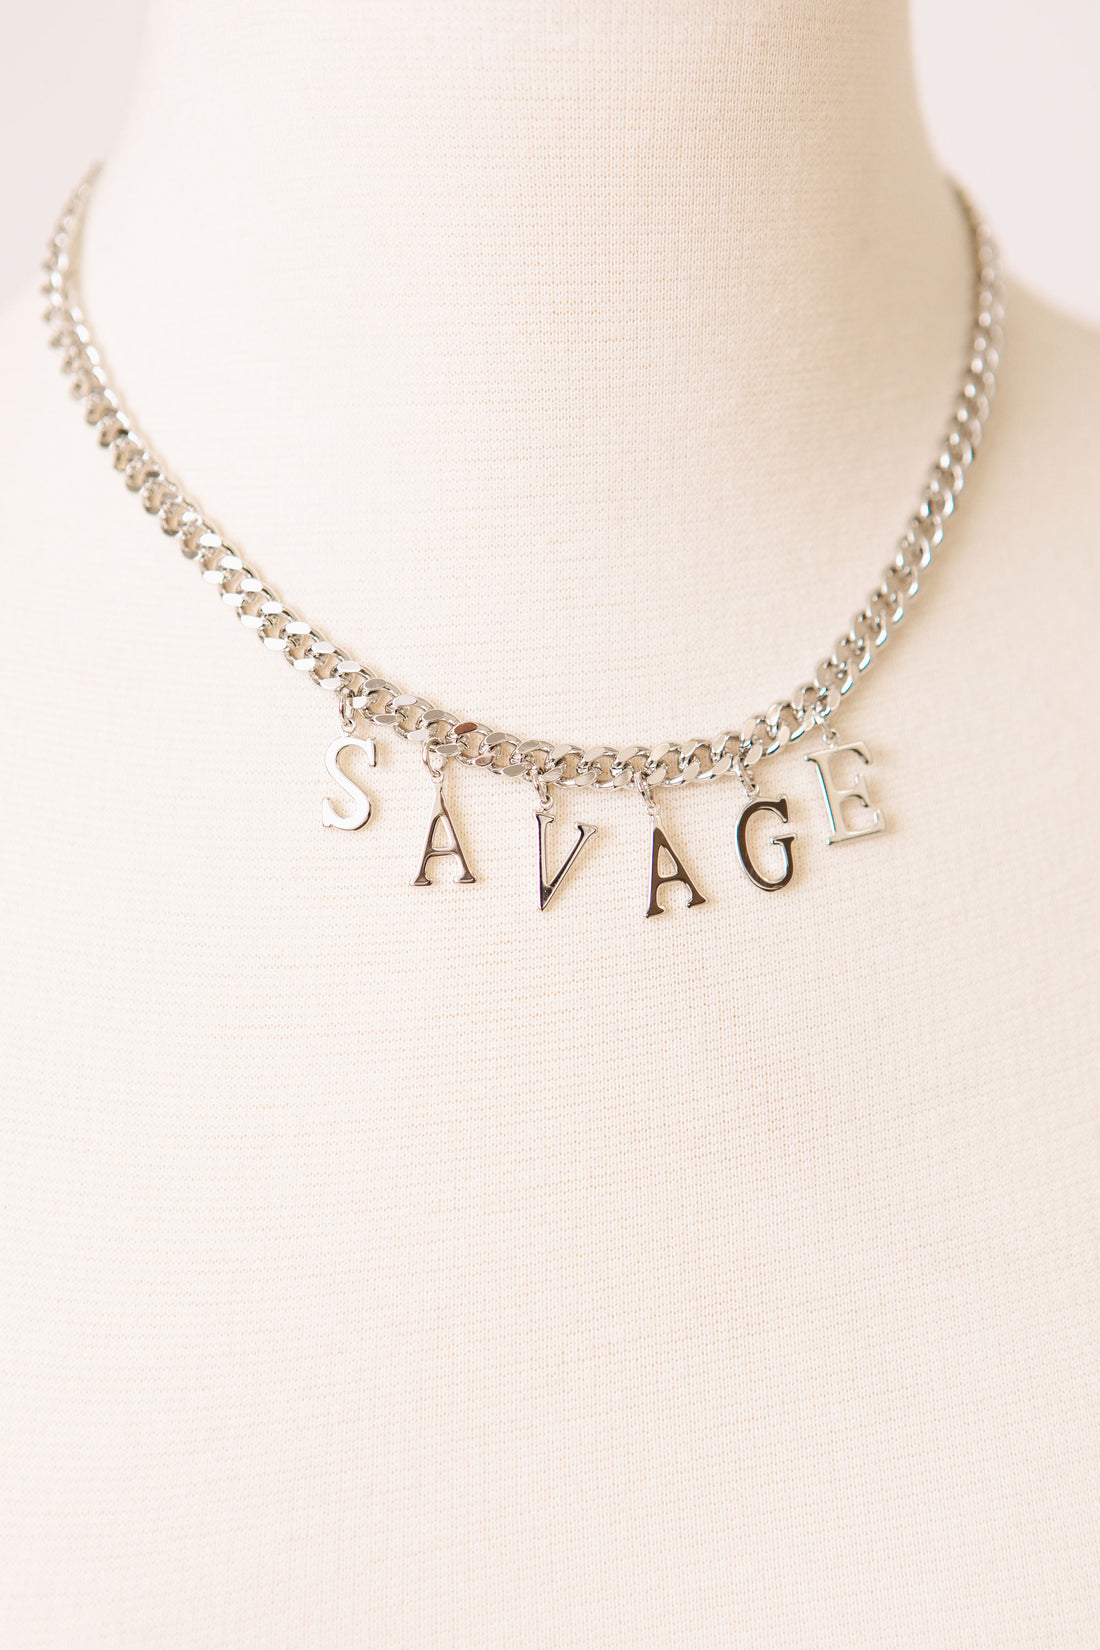 Ivy Exclusive - Savage Queen XO Affirmation Necklace